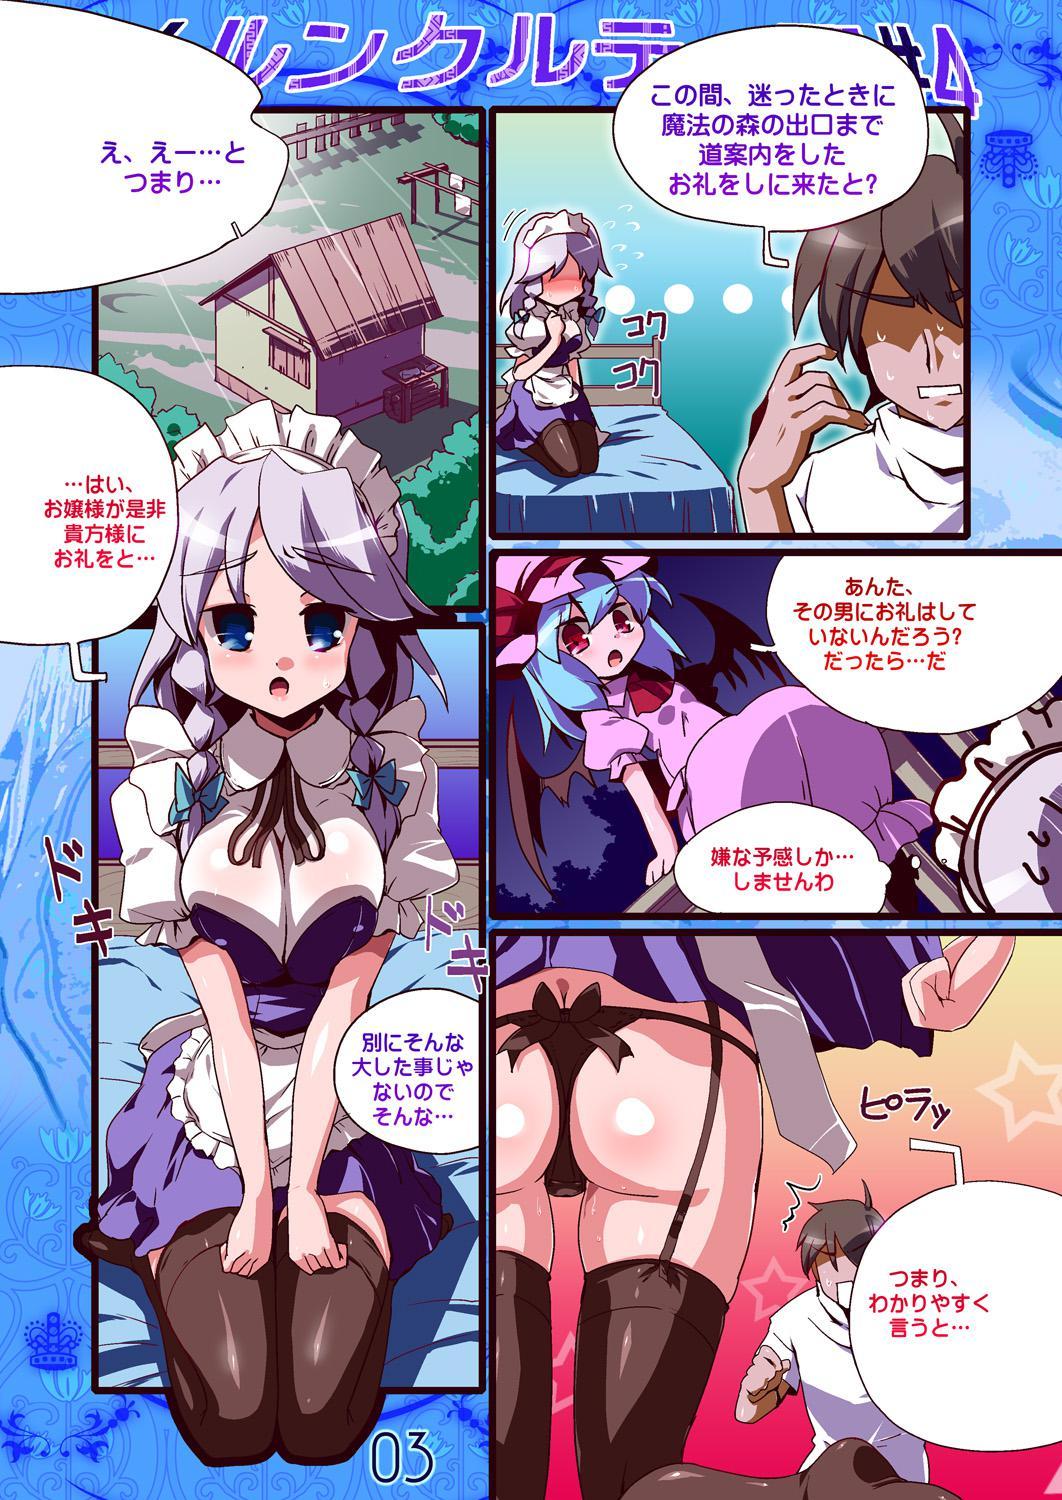 Street Merun Culture #4 - Touhou project Hand Job - Page 3